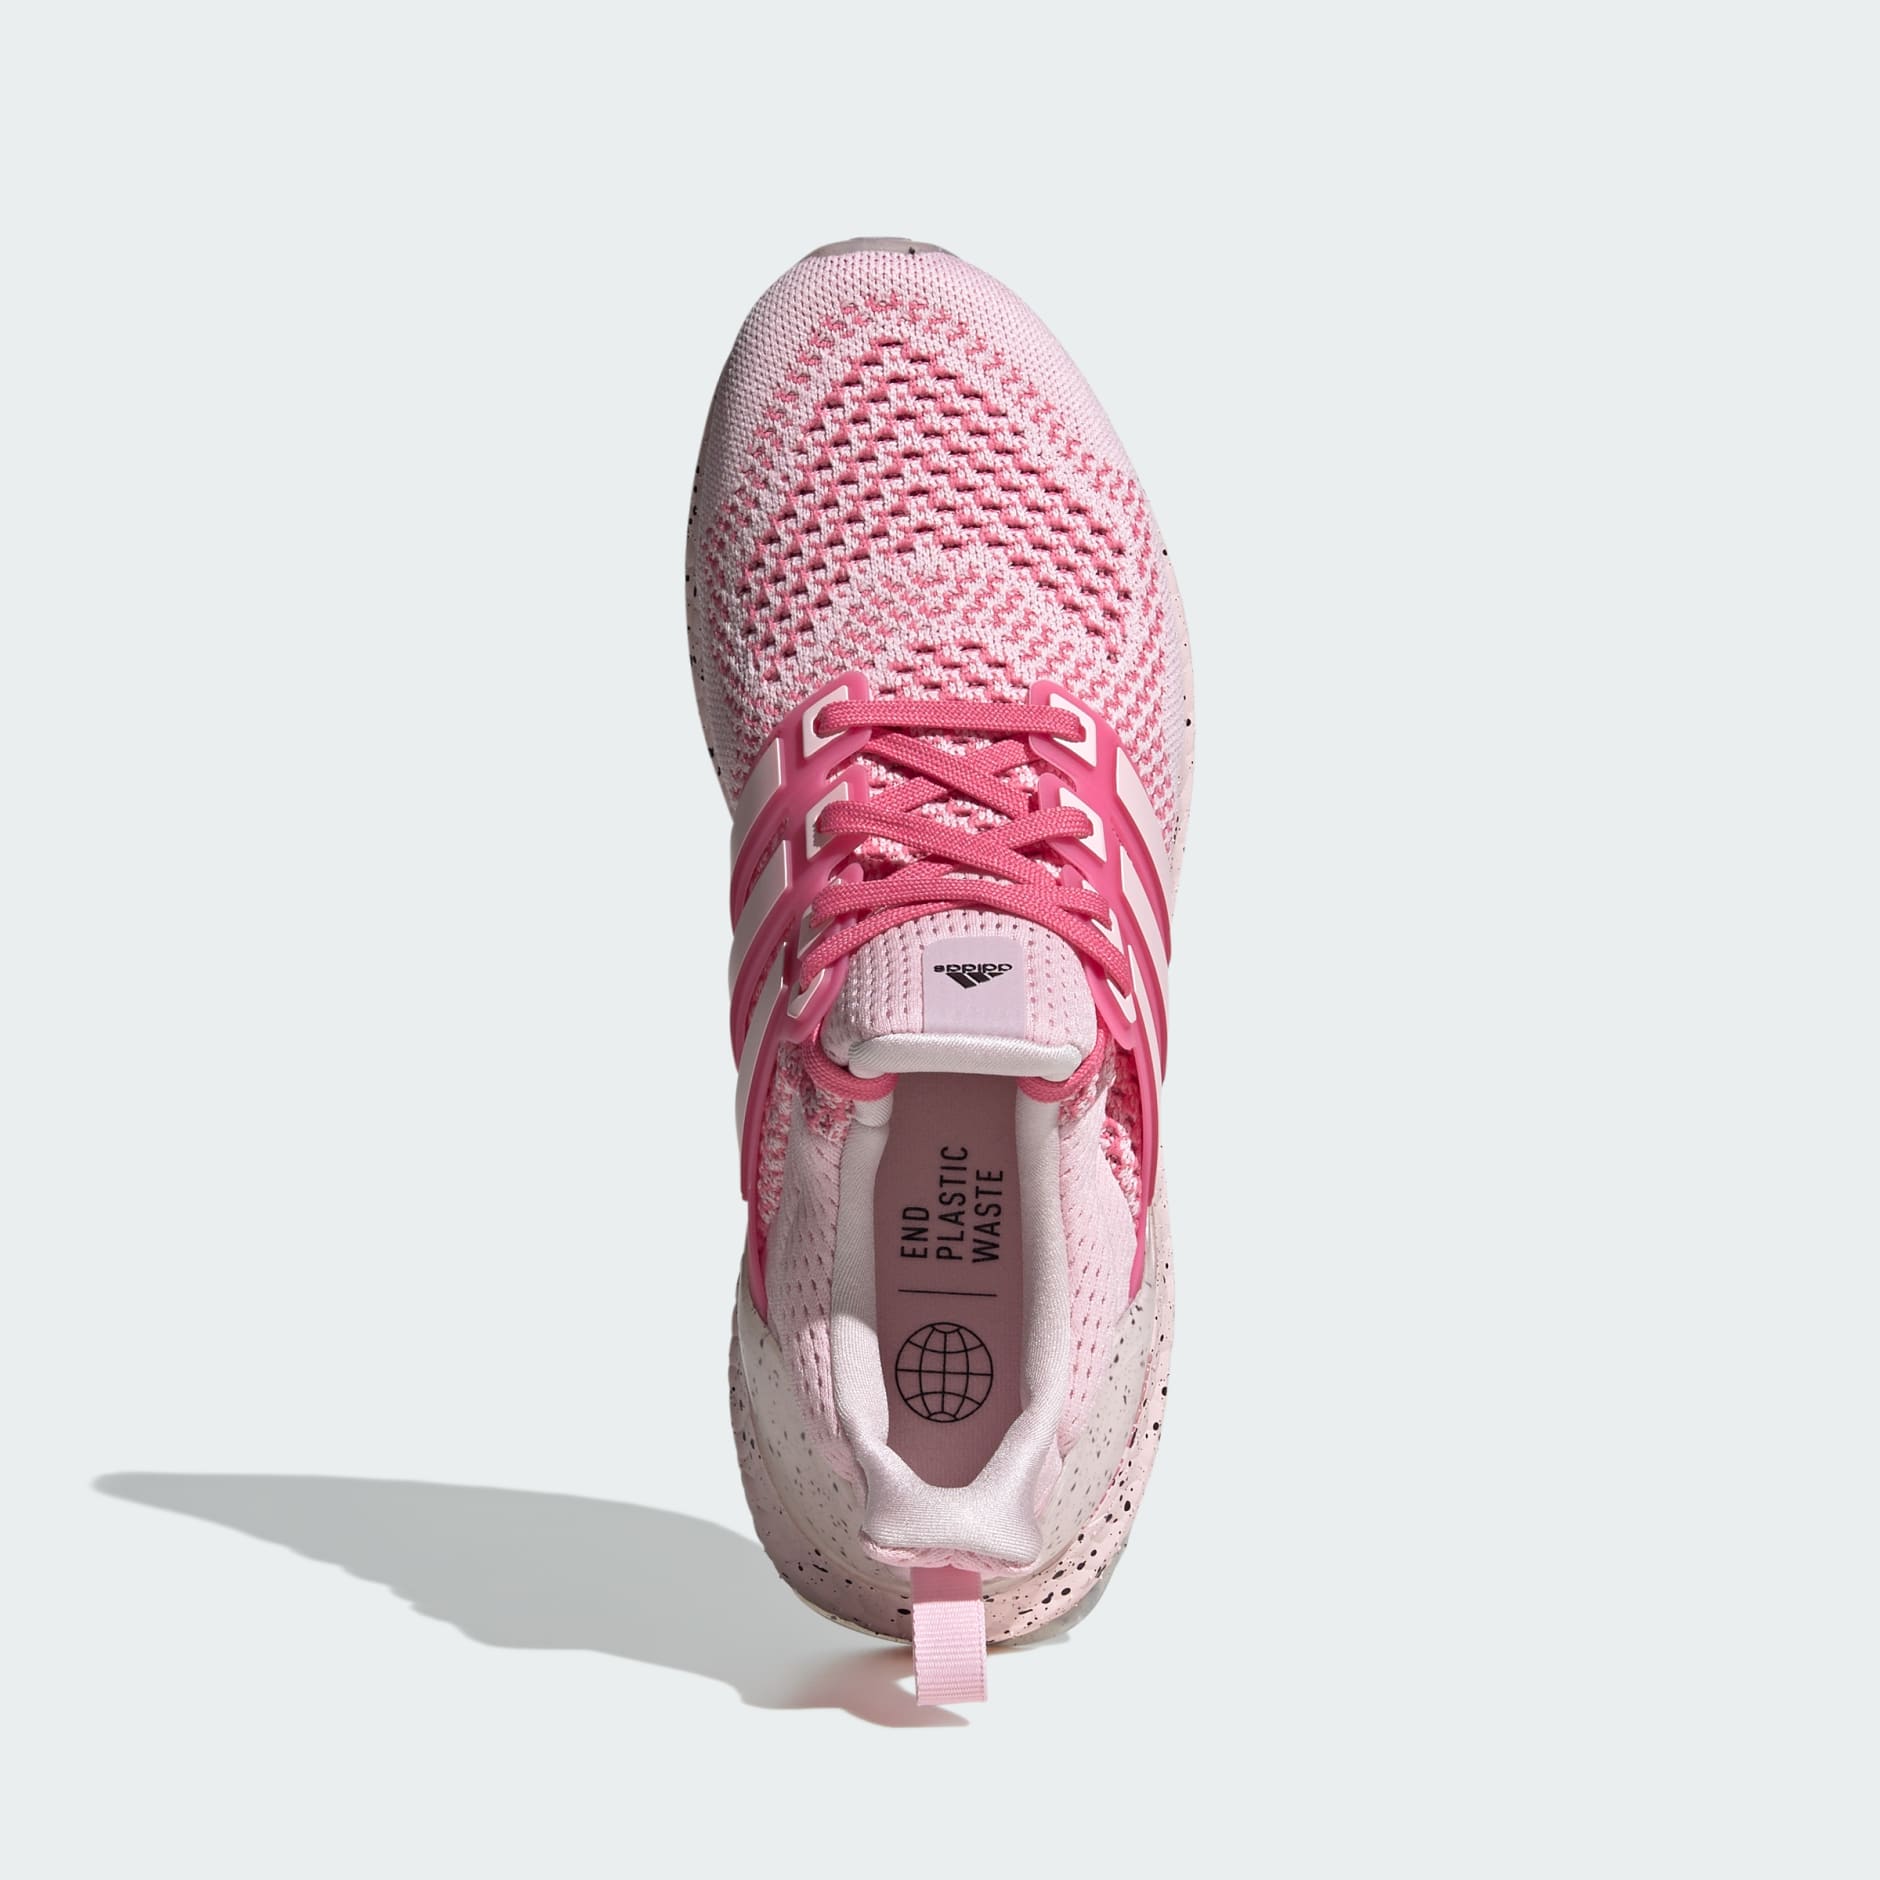 Women's Shoes - Ultraboost 1.0 Shoes - Pink